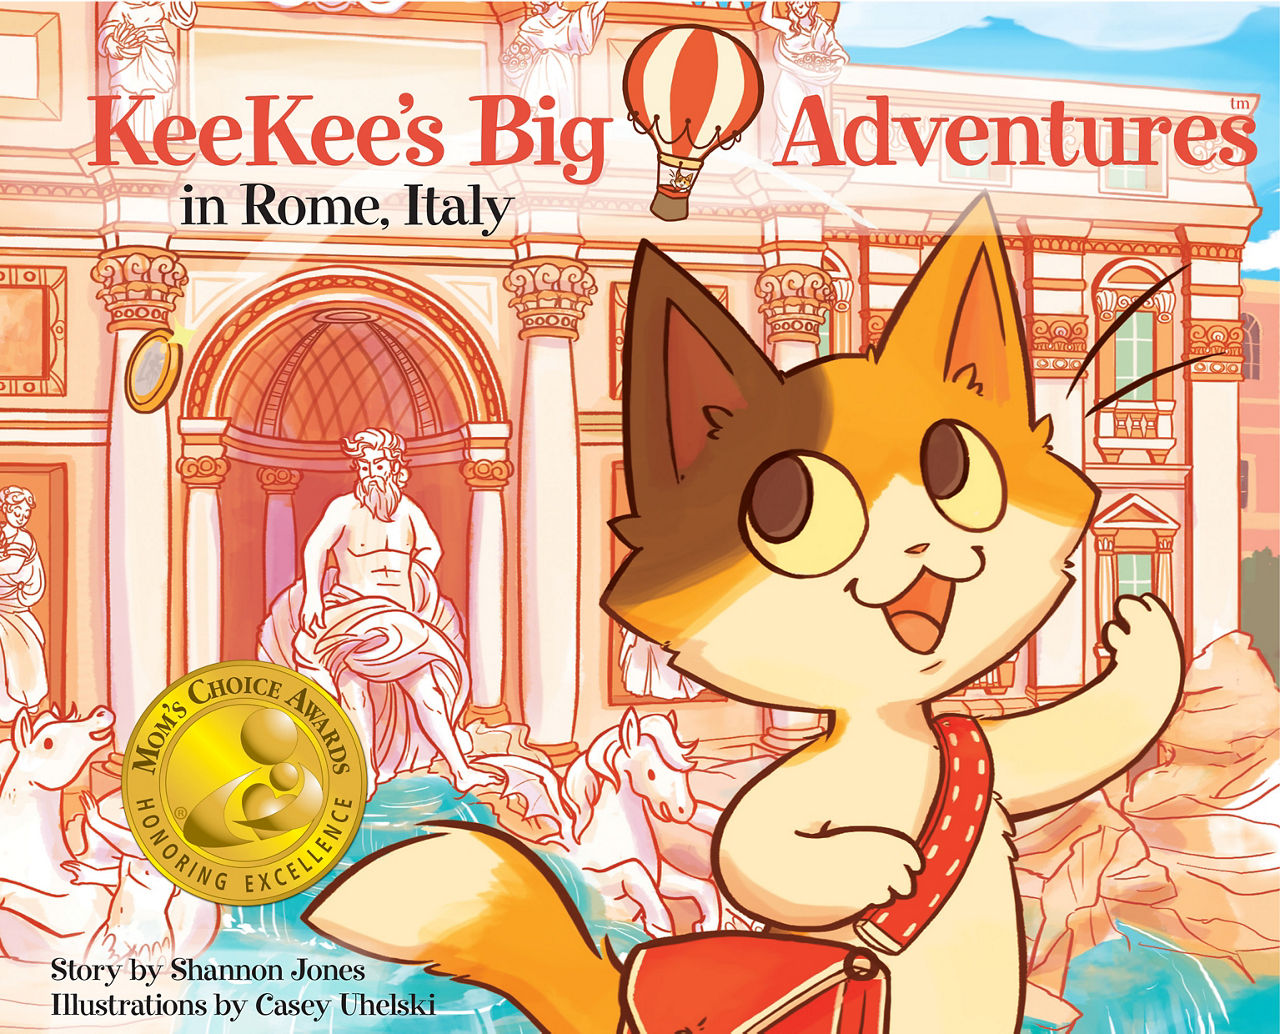 KeeKee’s Big Adventures in Rome, Italy book cover featuring Benjamin Franklin Award and Mom’s Choice Award emblems.